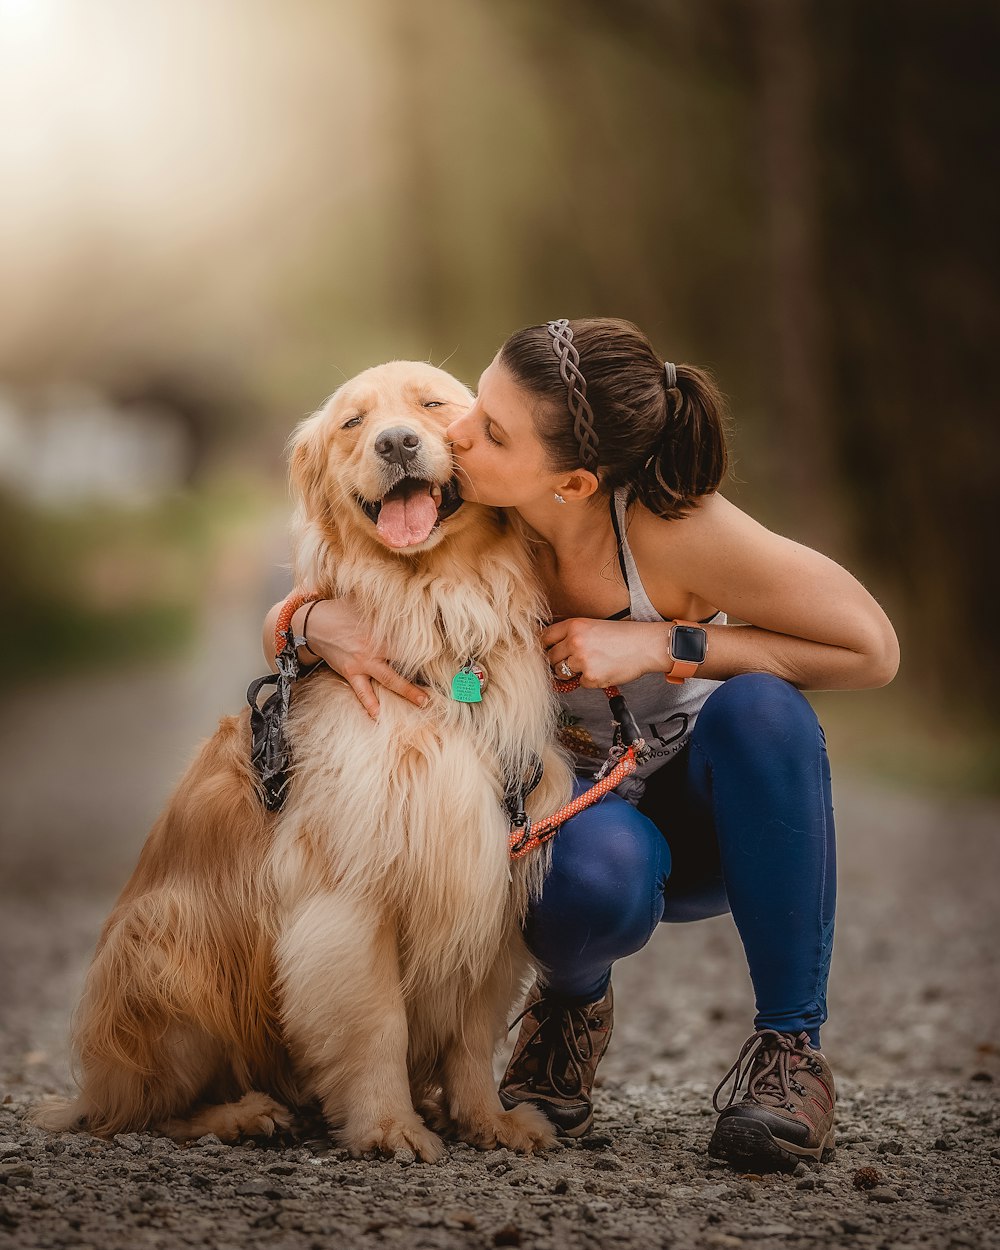 Ladis Dog Xxx Videos - 750+ Dog And Girl Pictures | Download Free Images on Unsplash